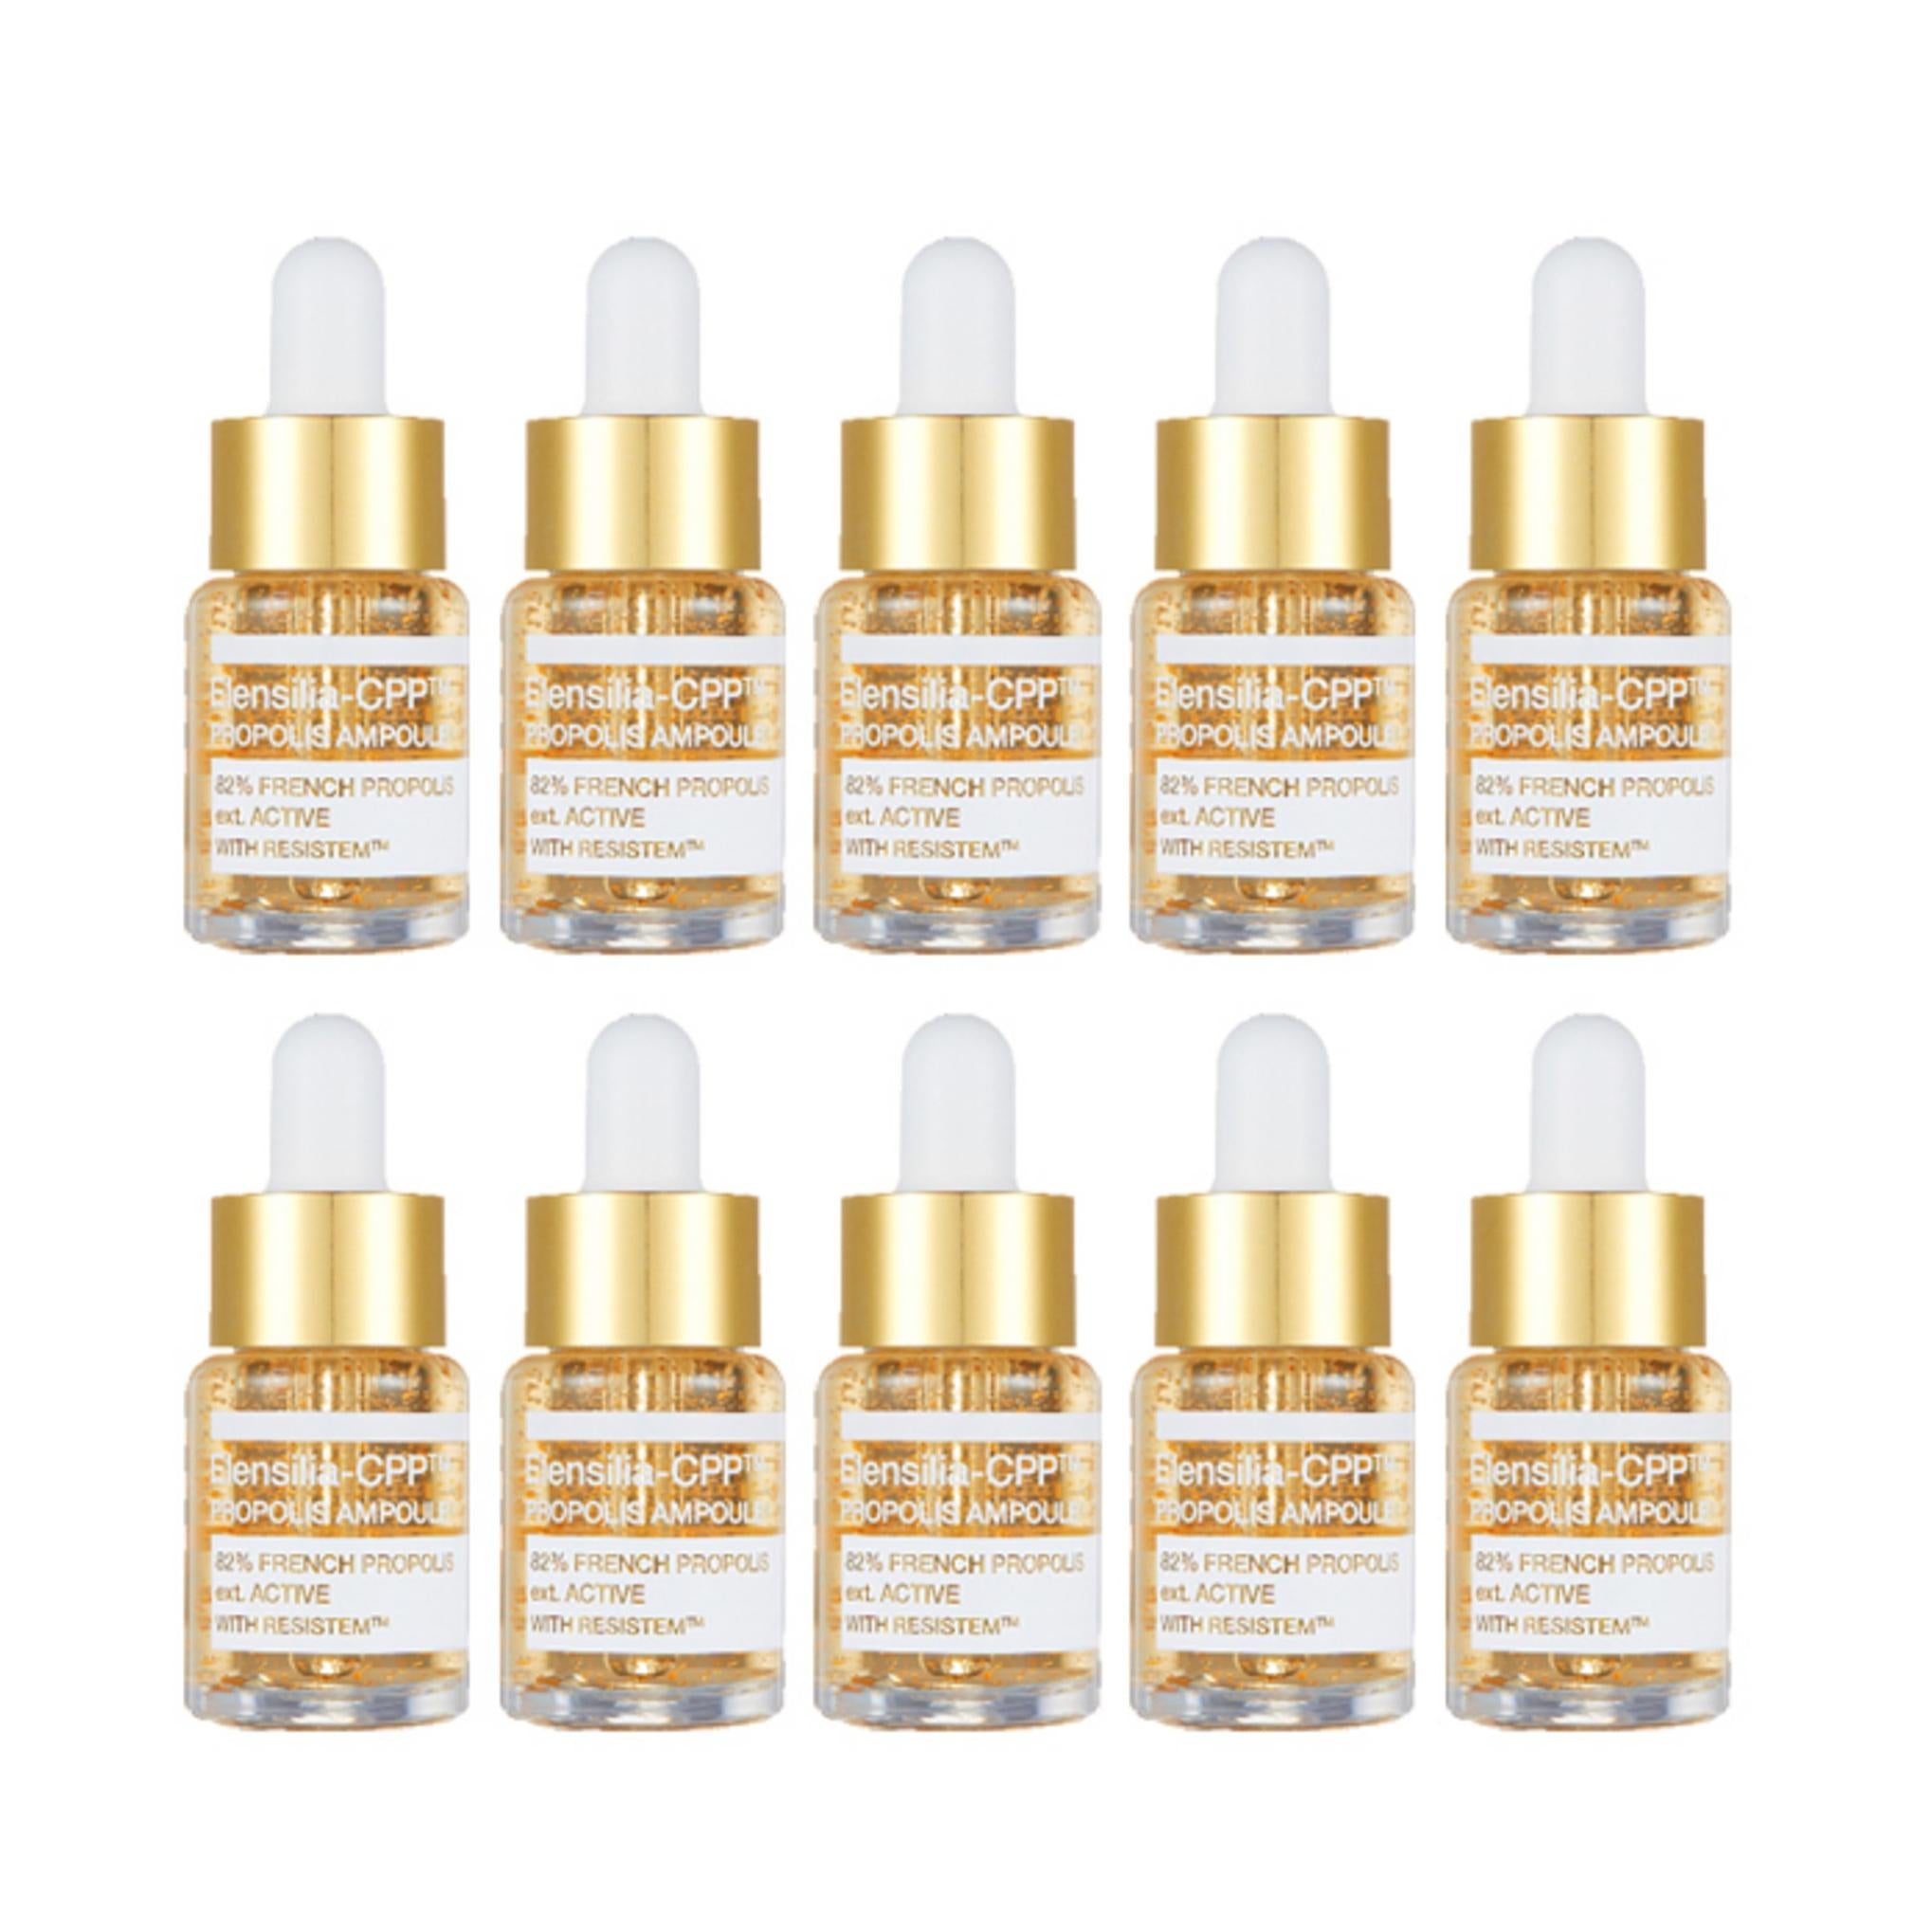 Elensilla CPP French Propolis 82 Resystem Gold Ampoule